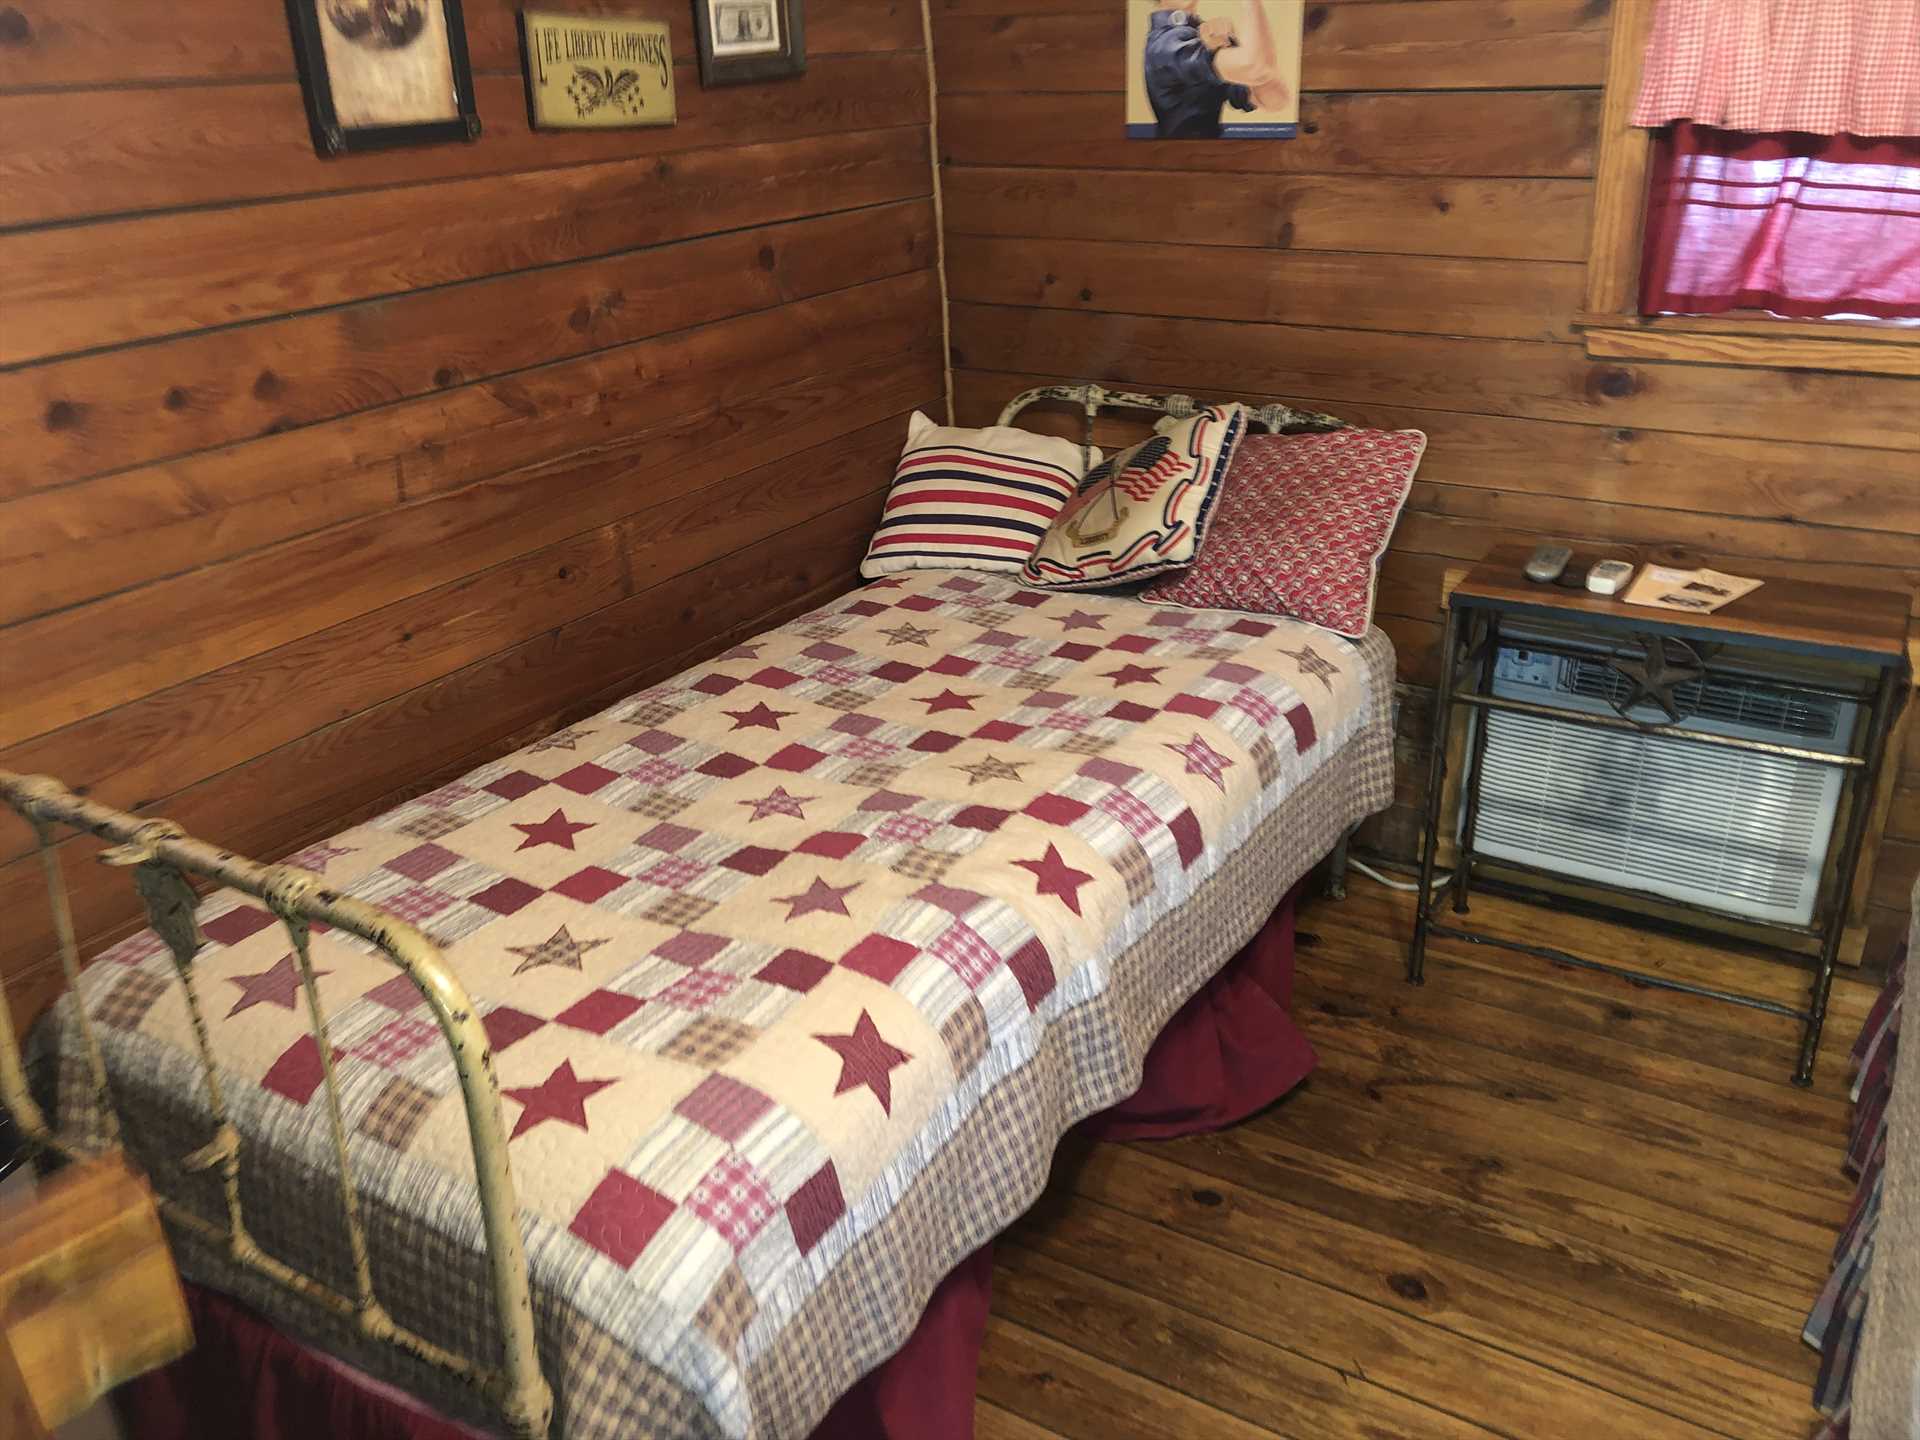                                                 There's a queen and twin bed in the cabin, making it just right for a small family getaway! All bed and bath linens are included, too.